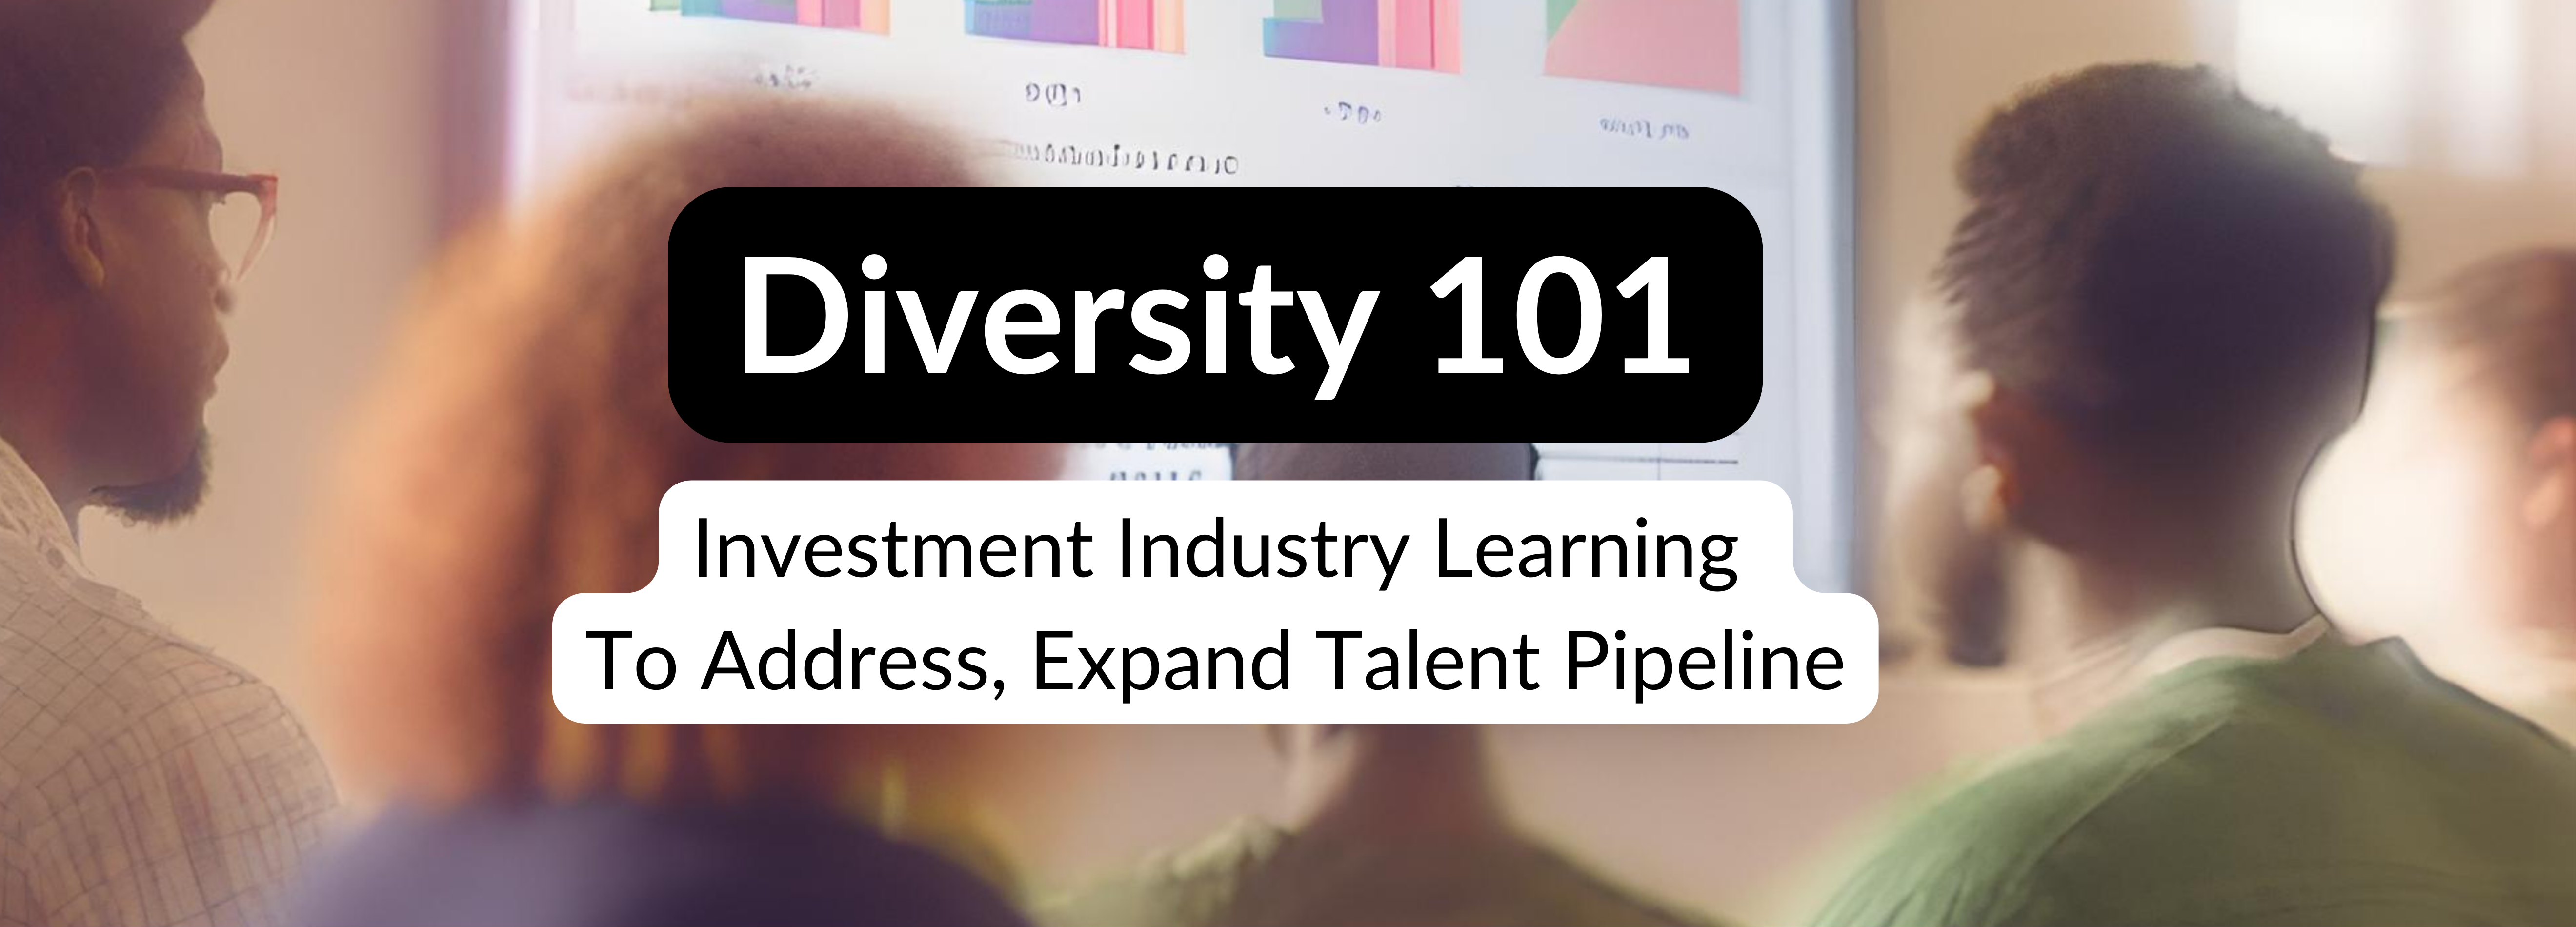 Diversity 101: Investment Industry Learning To Address, Expand Talent Pipeline